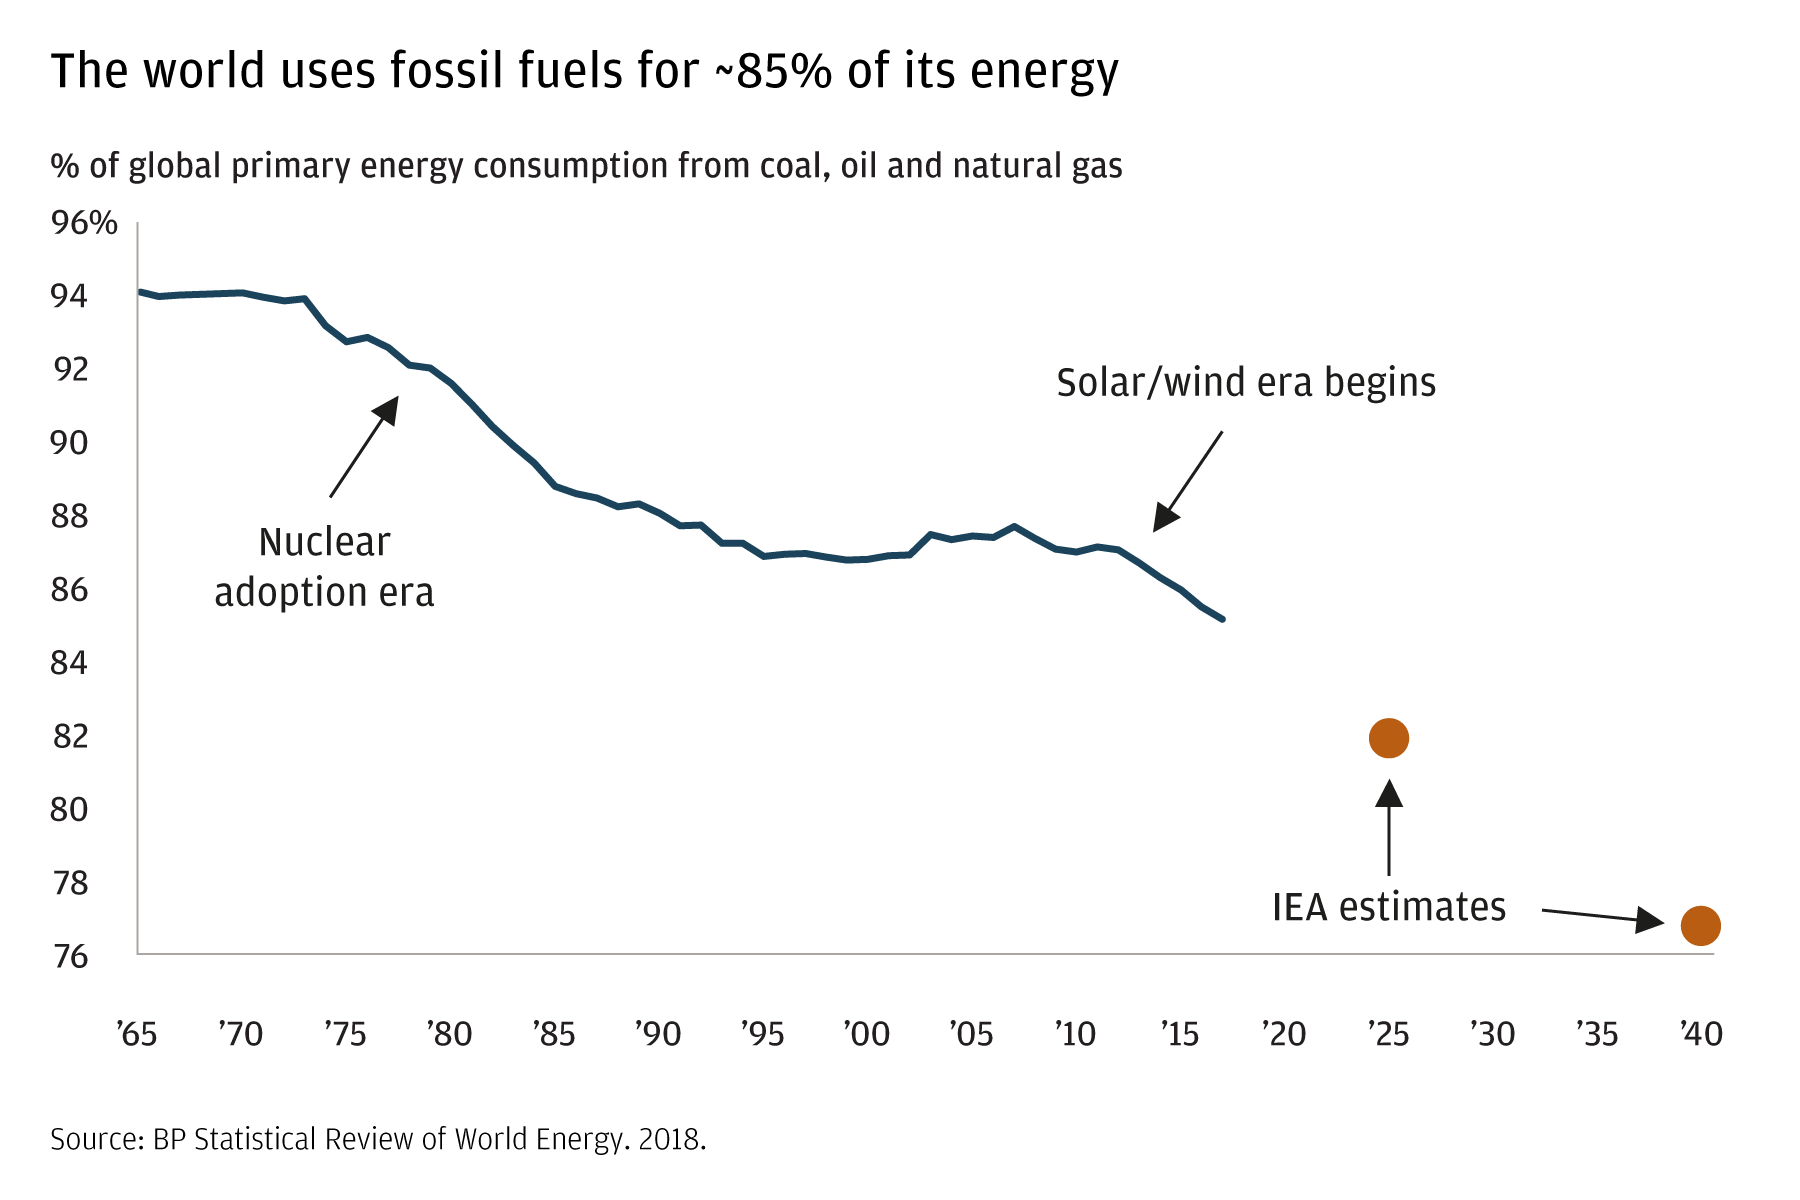 This line chart shows the decline in fossil fuel usage between 1965 and today, and includes estimates of usage in 2025 and 2040. Though fossil fuels accounted for 94 percent of global energy production in 1965, nuclear, solar, and wind power have lowered fossil fuel usage to about 85 percent of energy production today. By 2020, the Energy Information Administration estimates fossil fuel usage will fall to 82 percent; and to around 76 percent by 2040. 